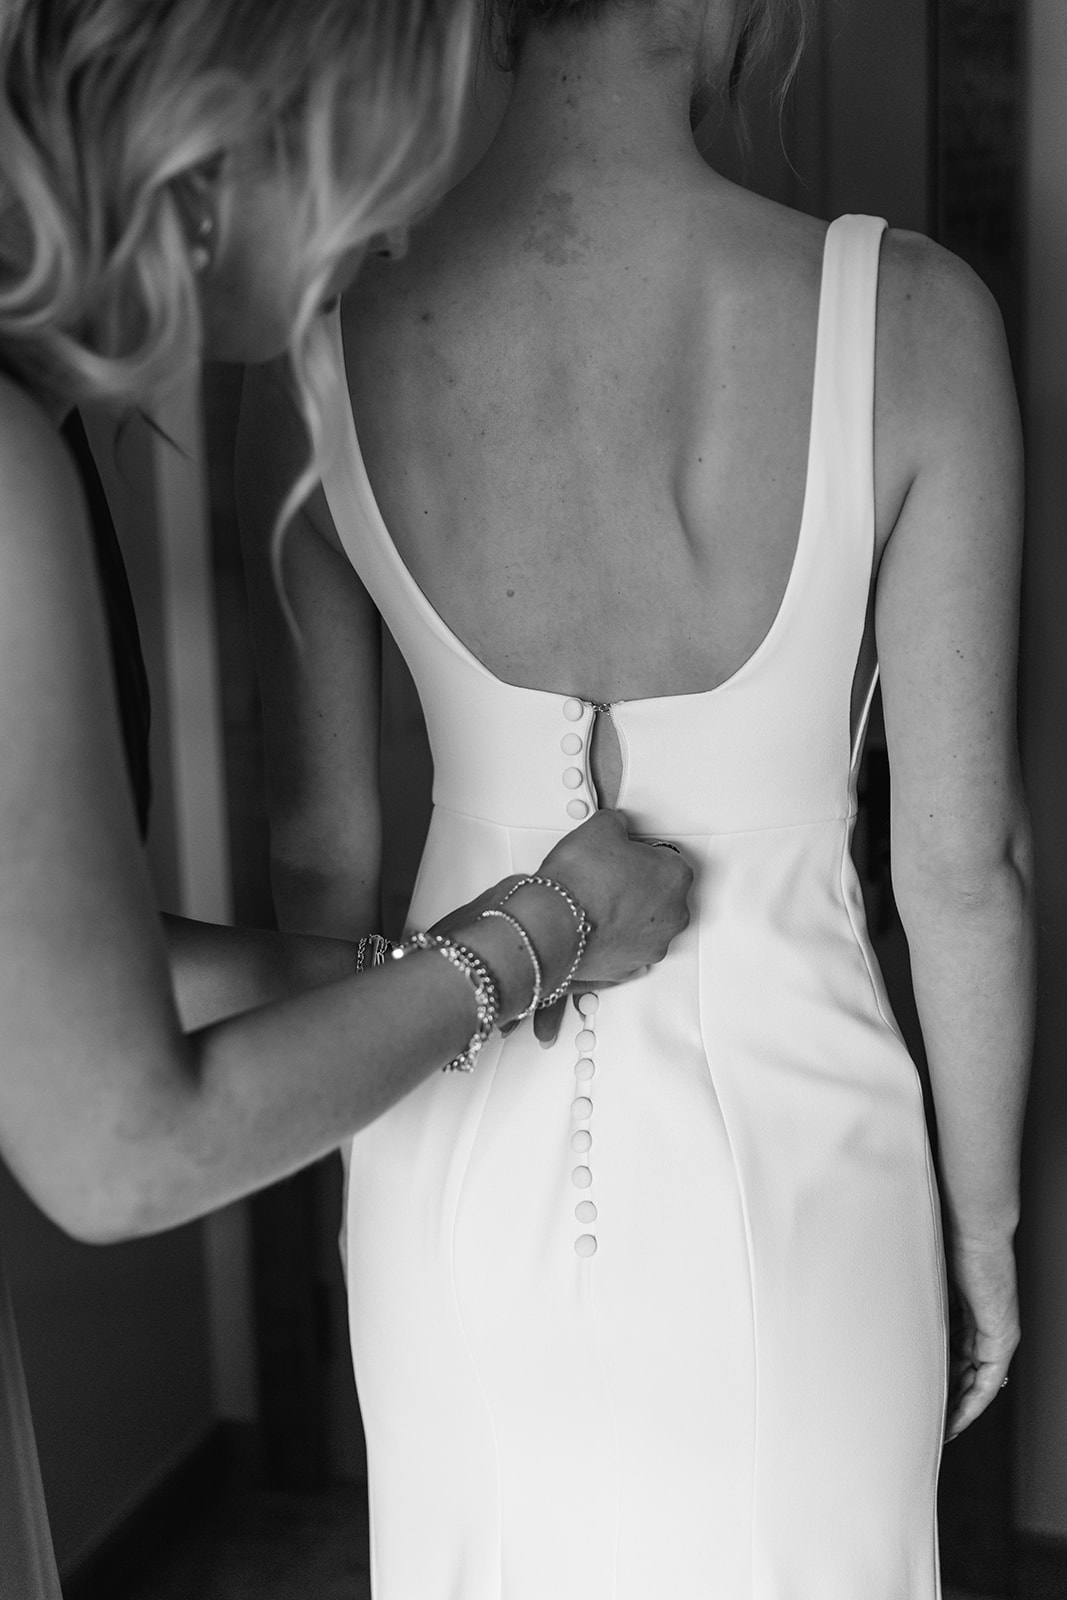 Bride getting in dress at a Bury Manor Barn Wedding in Sussex. Photographer OliveJoy Photography.